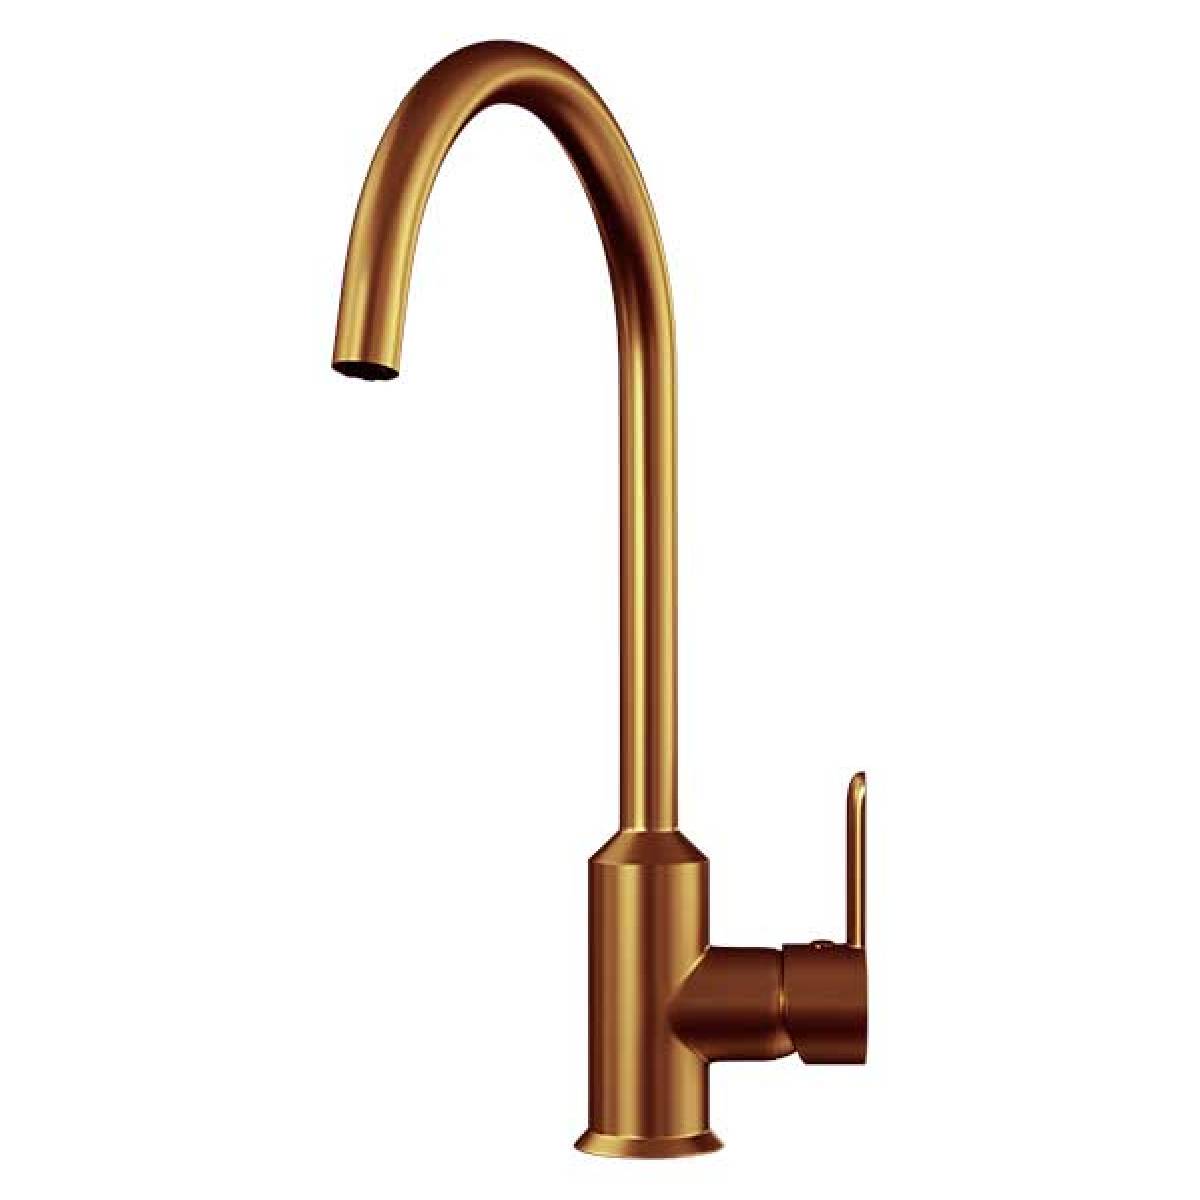 Entice Kitchen Sink Mixer with Swivel Spout & Single Lever - Brushed Copper Finish (10948)